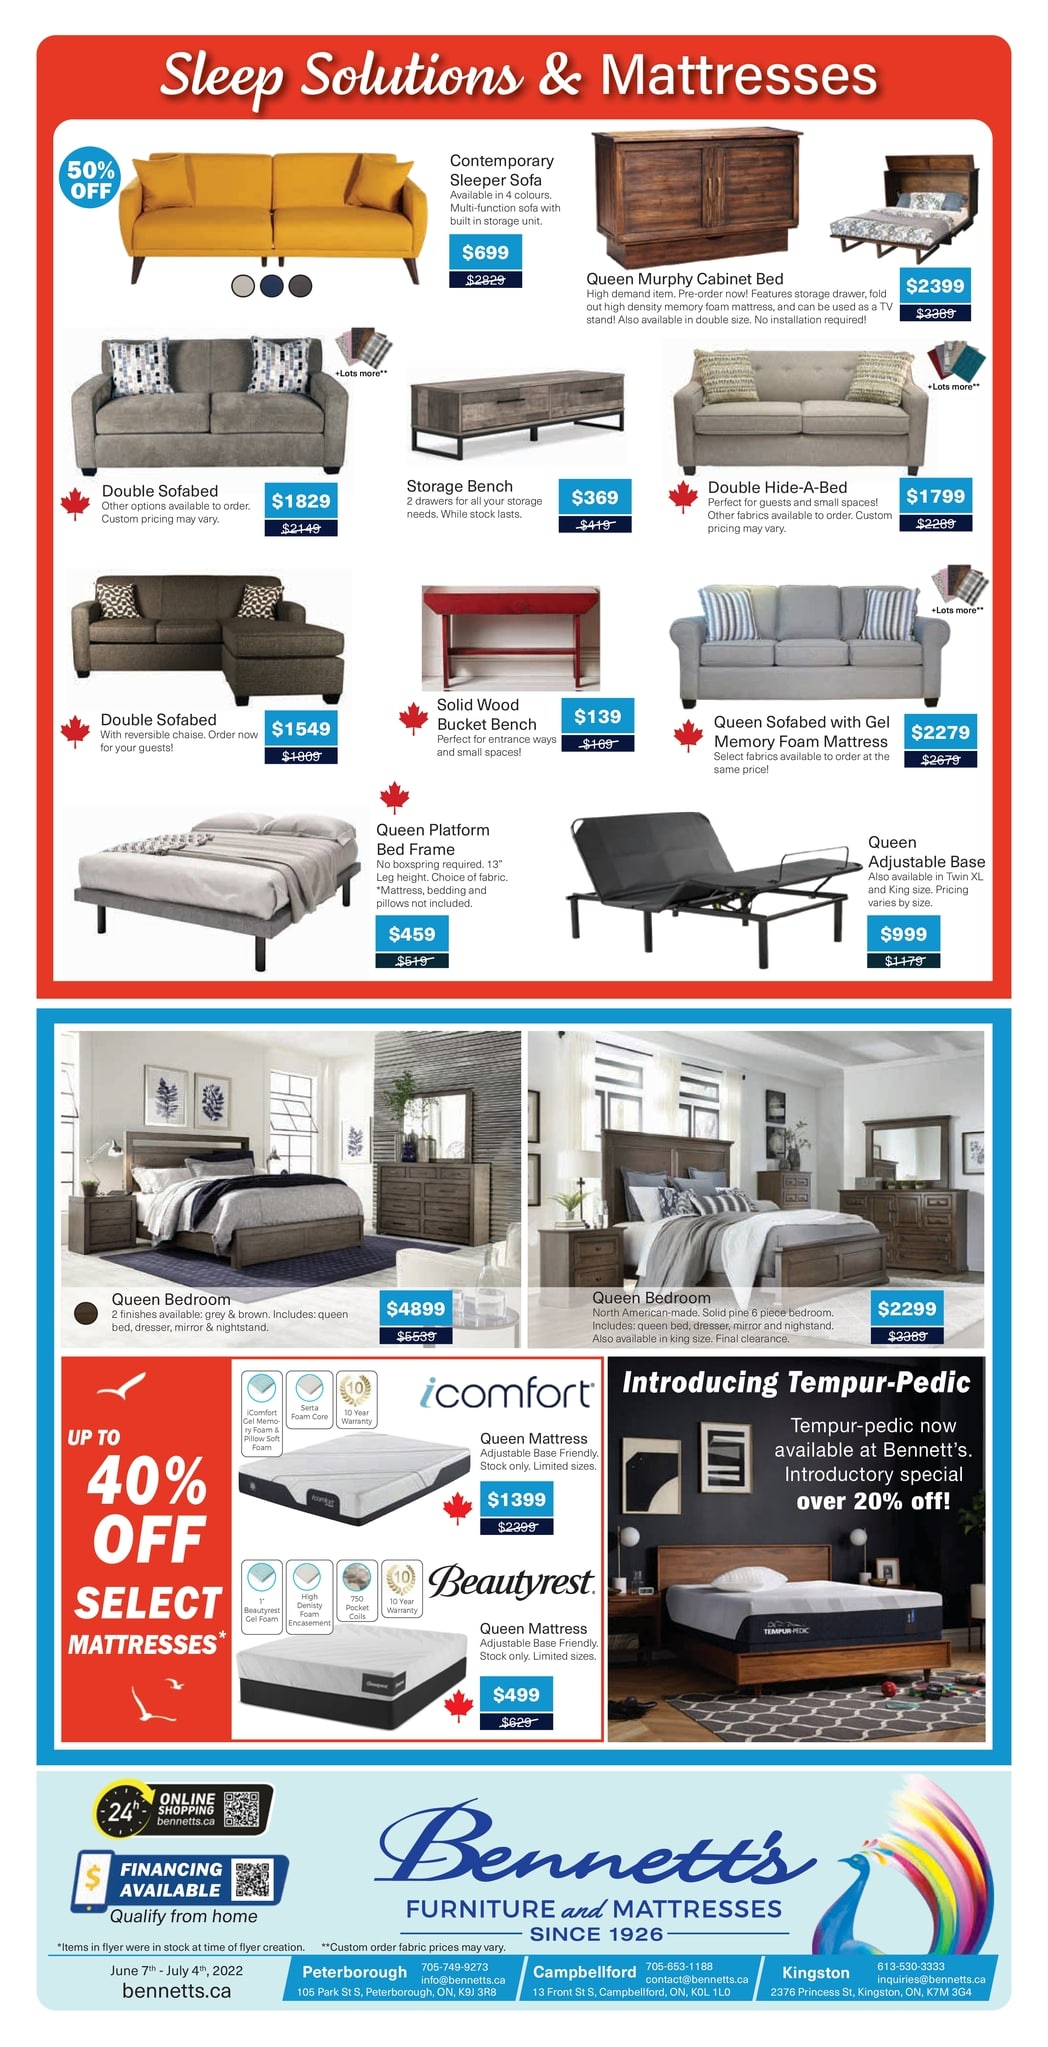 Bennett's Furniture and Mattresses - Monthly Savings - Page 6